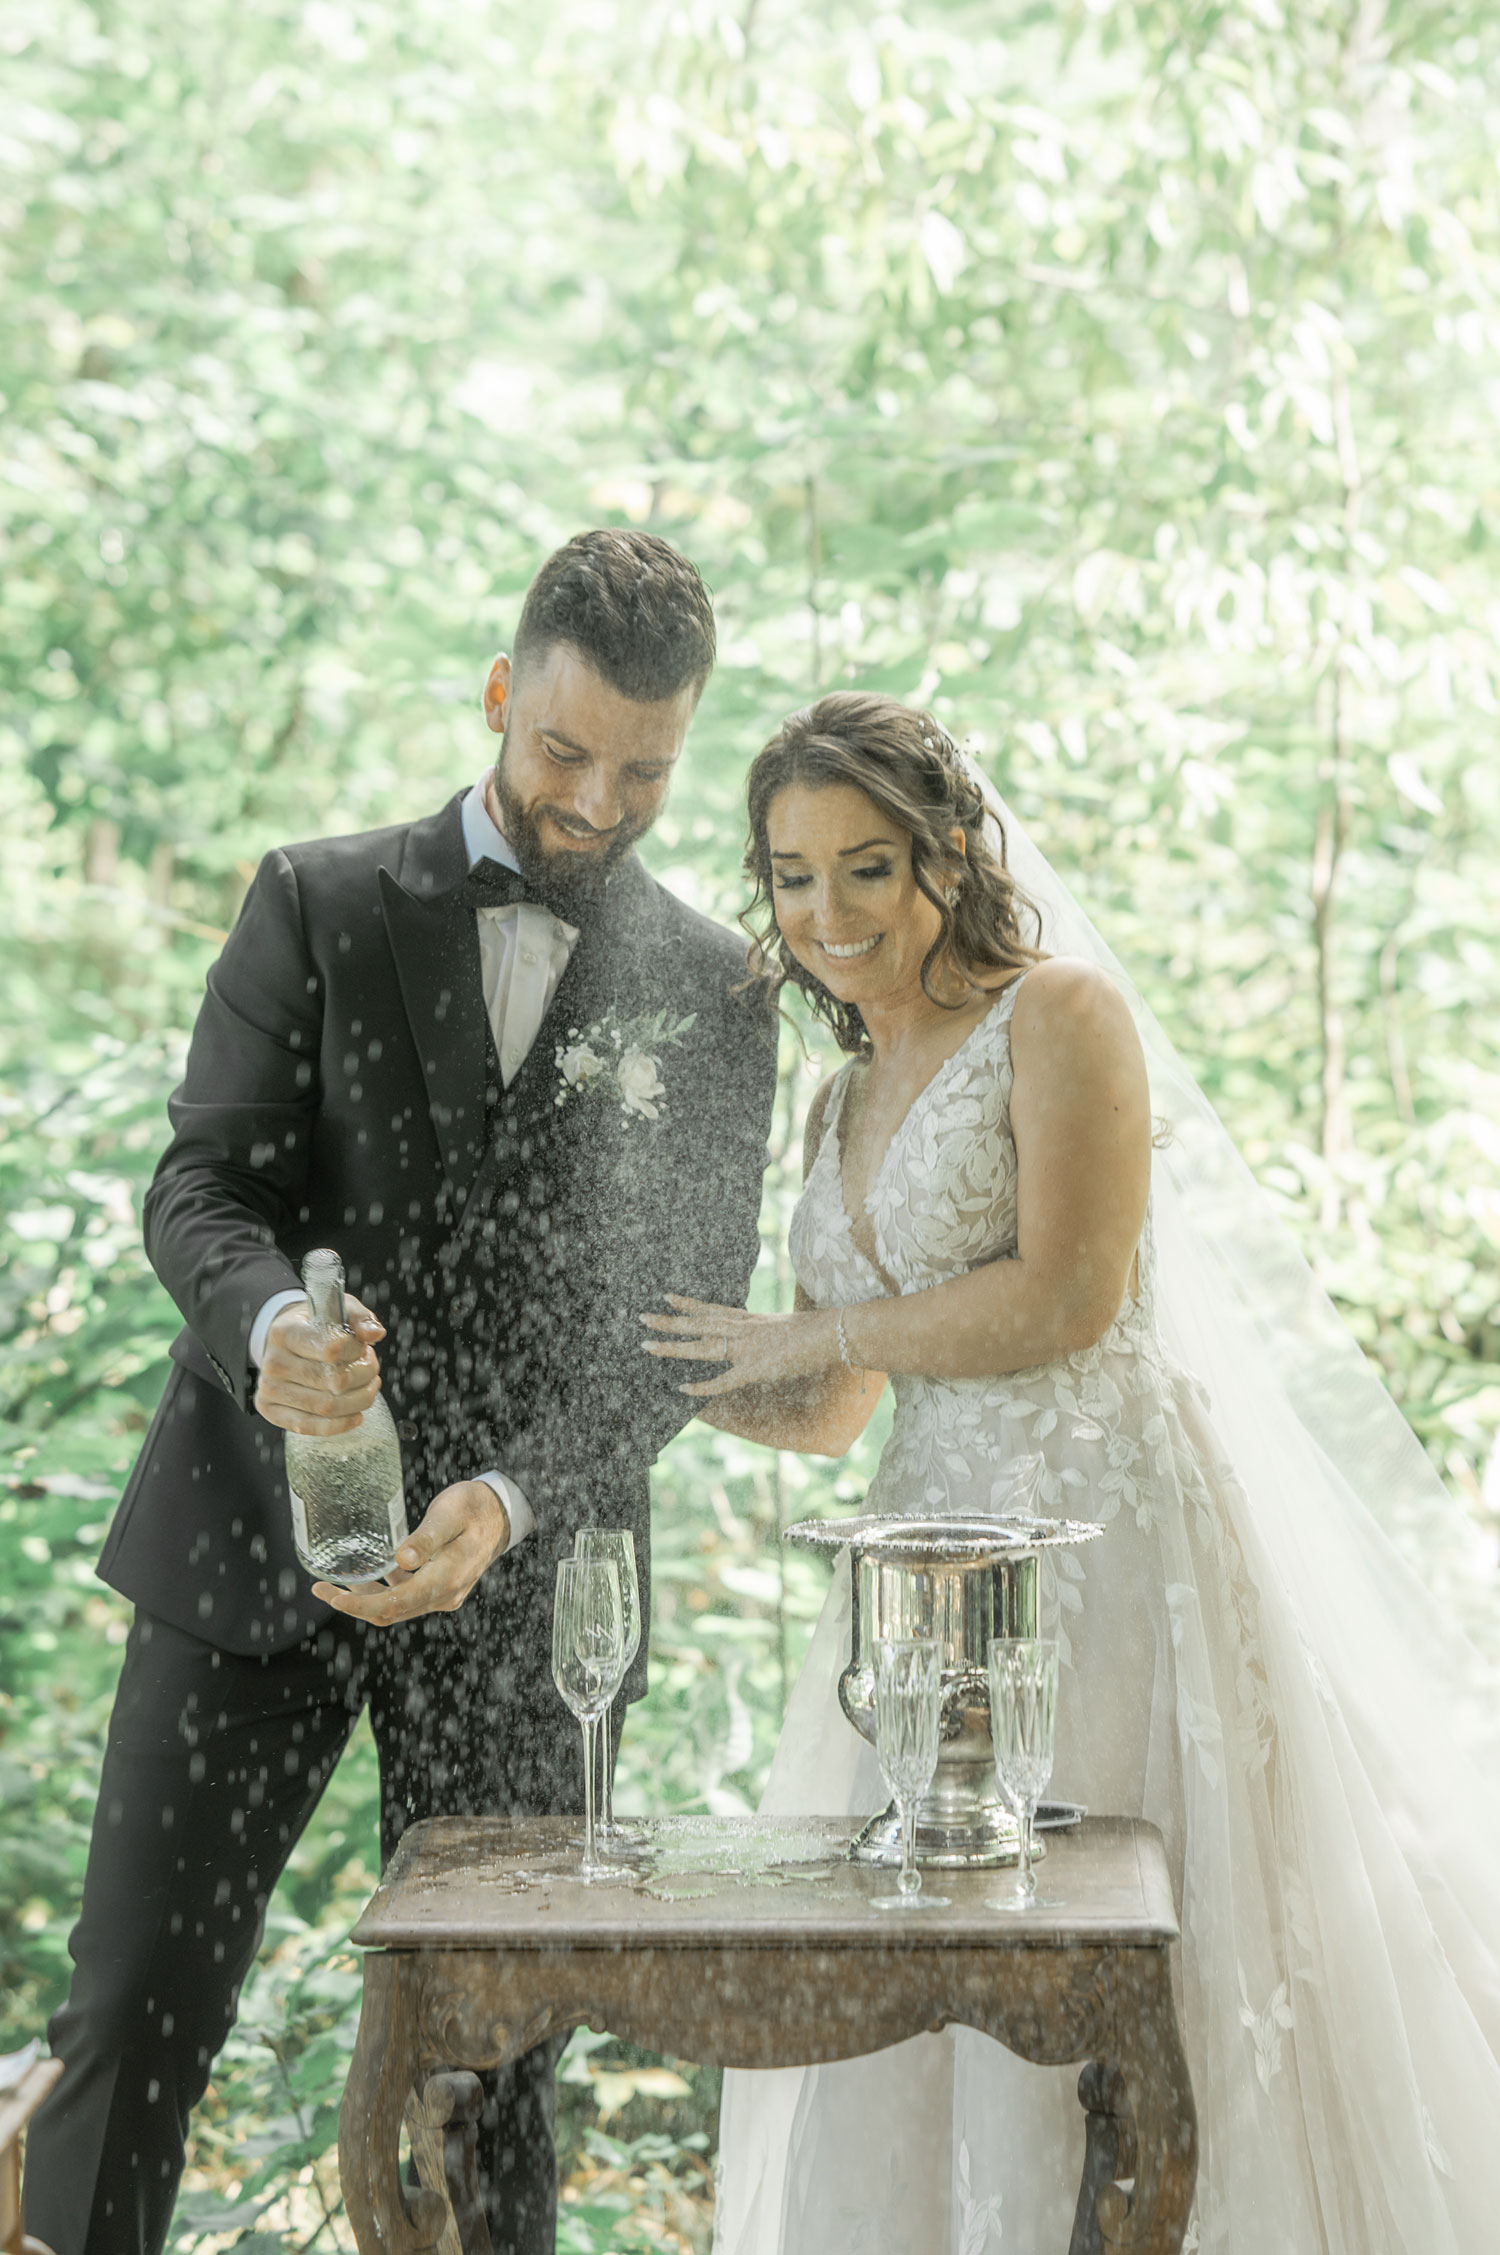 Bride and Groom champagne toast after the wedding ceremony